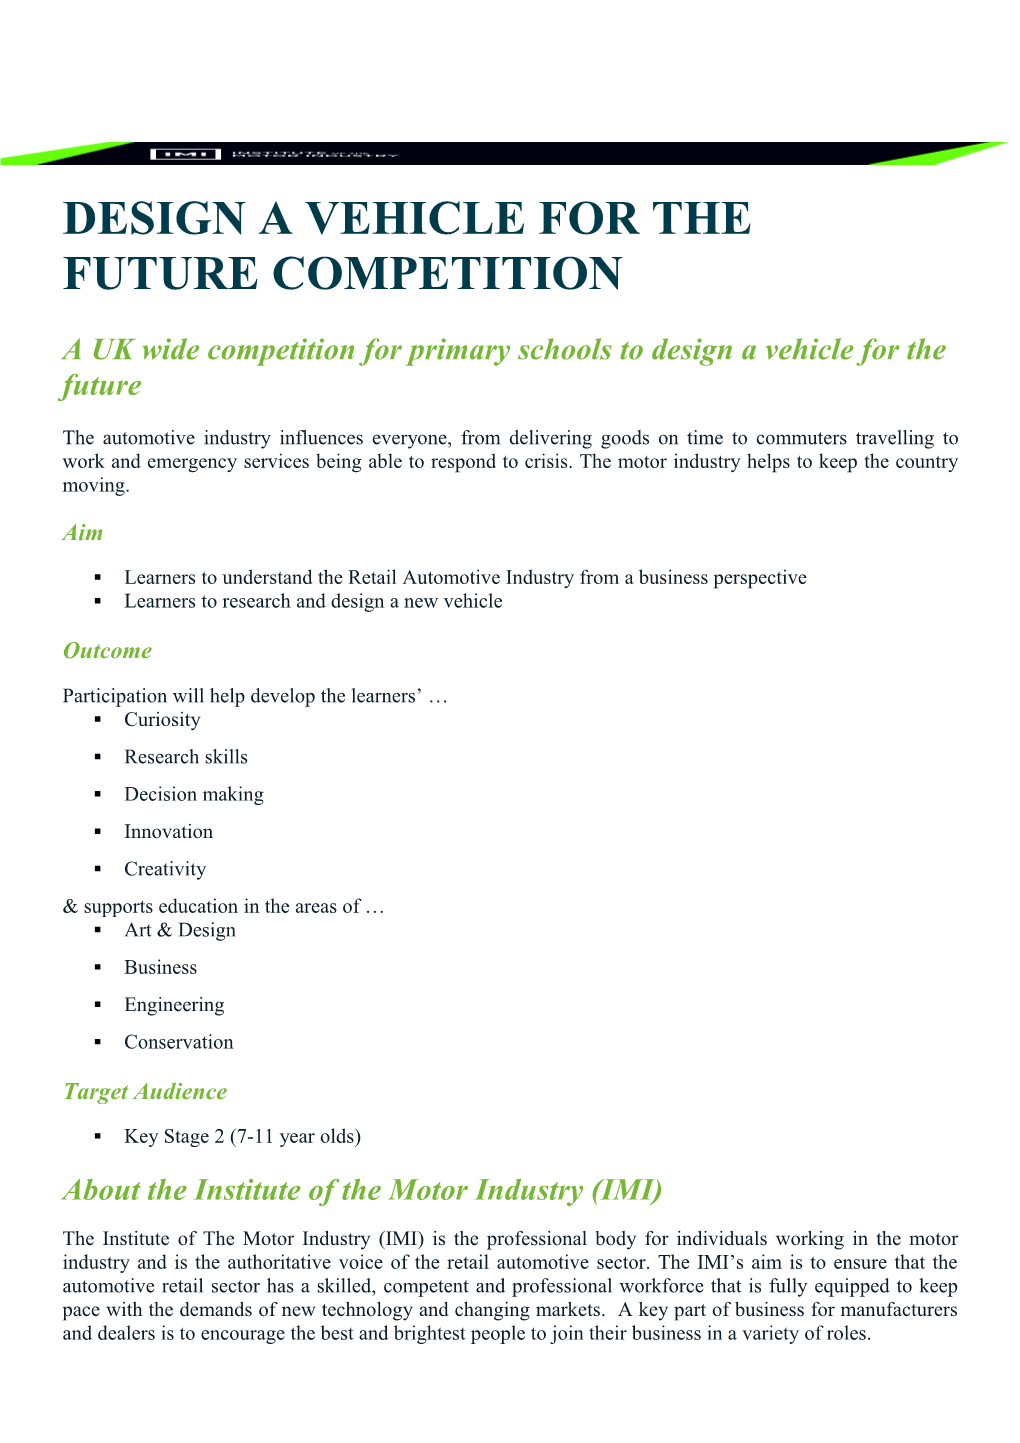 Design a Vehicle for the Future Competition